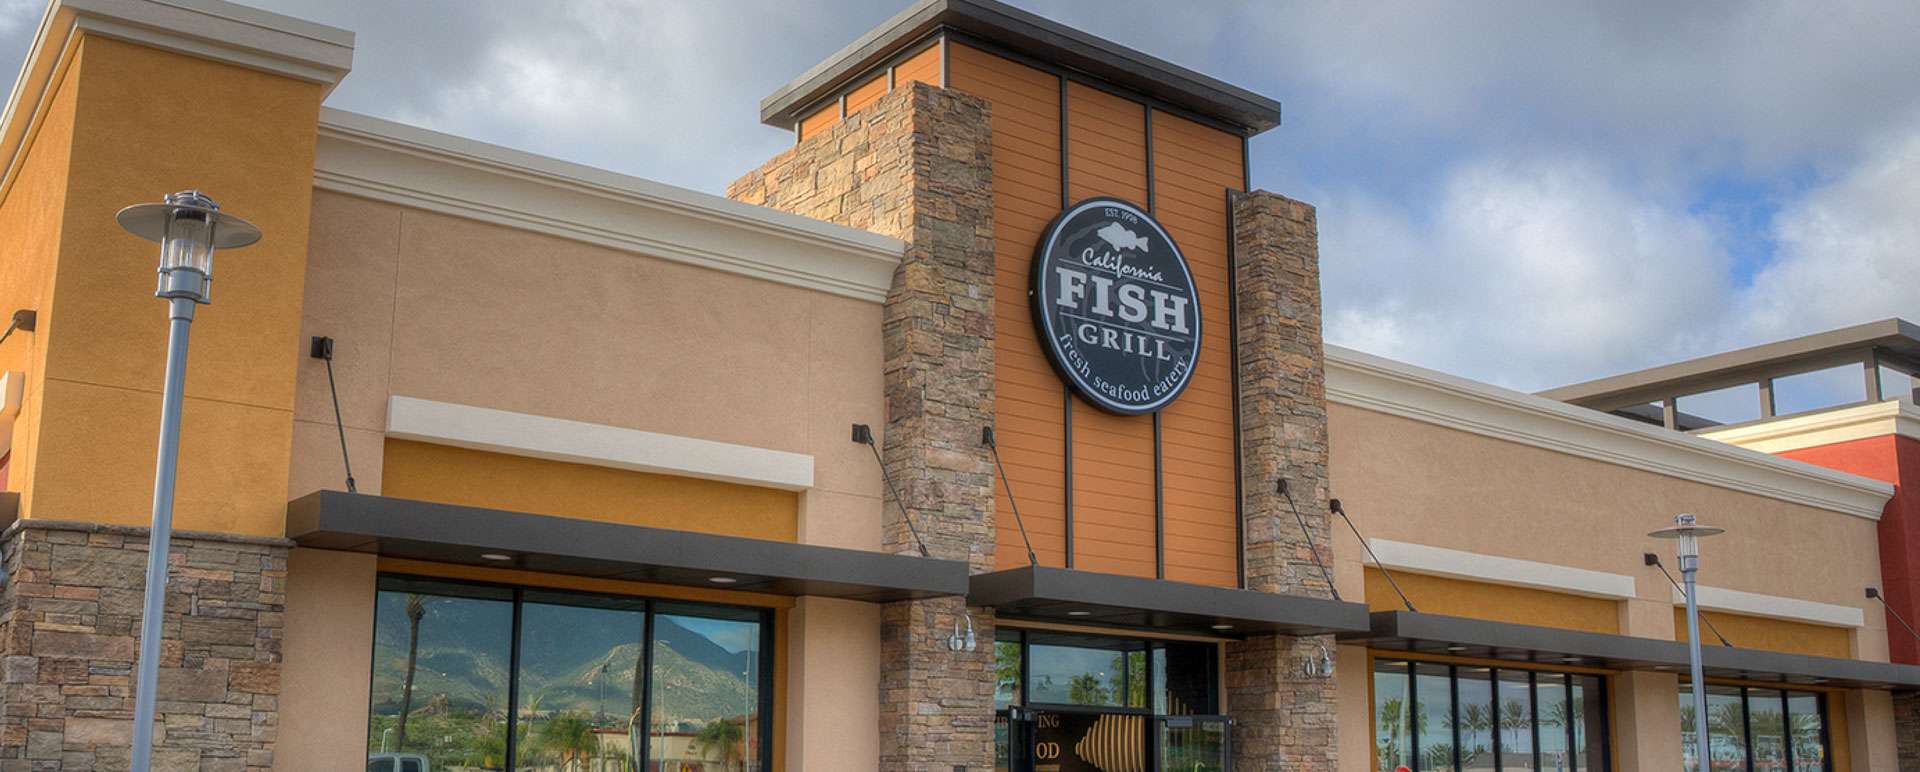 Velocity Retail Brings California Fish Grill to the Phoenix Area with 1st Store 2